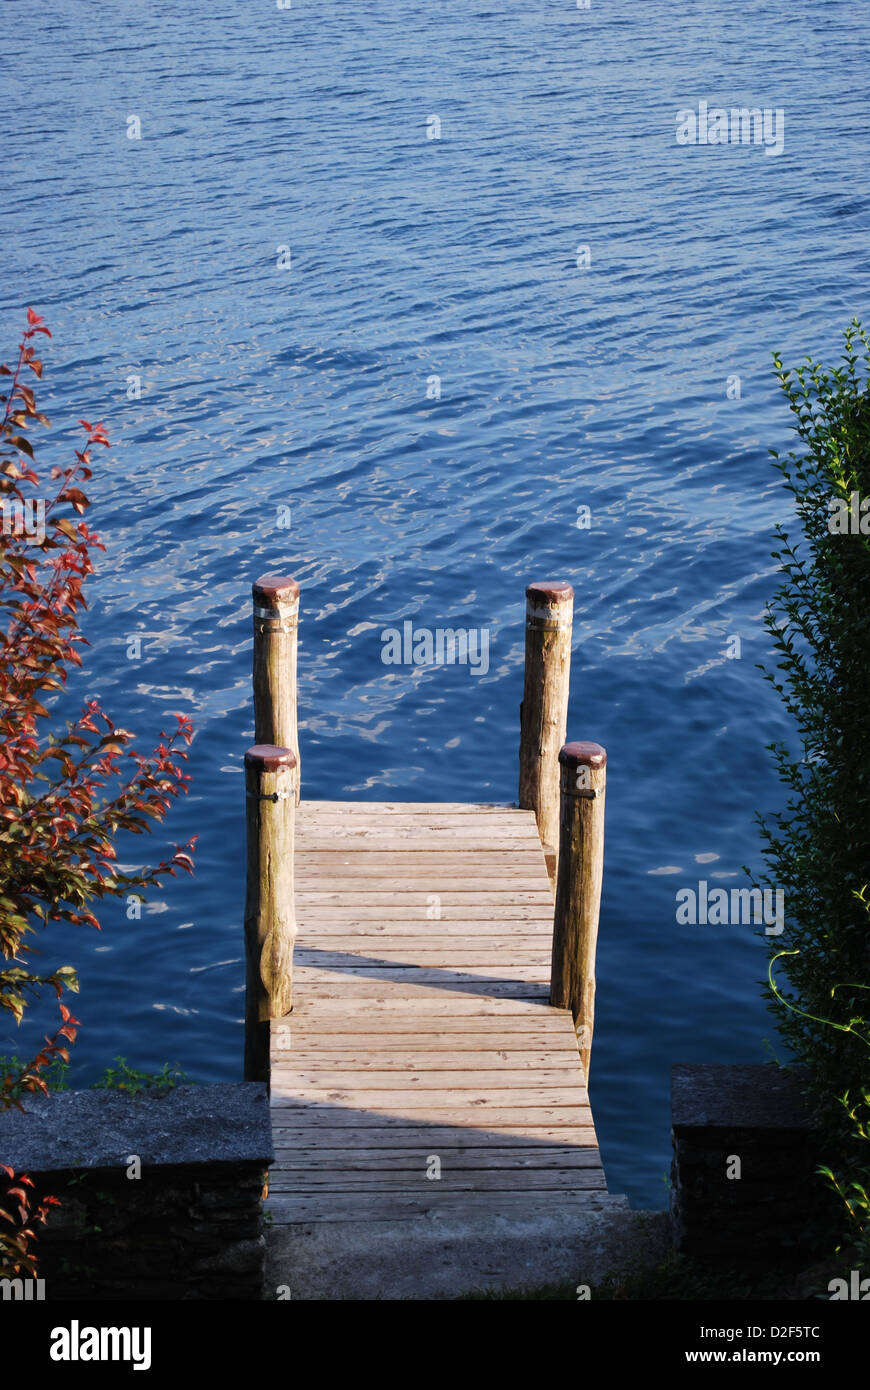 Small wooden dock on blue water, Orta lake, Italy Stock Photo